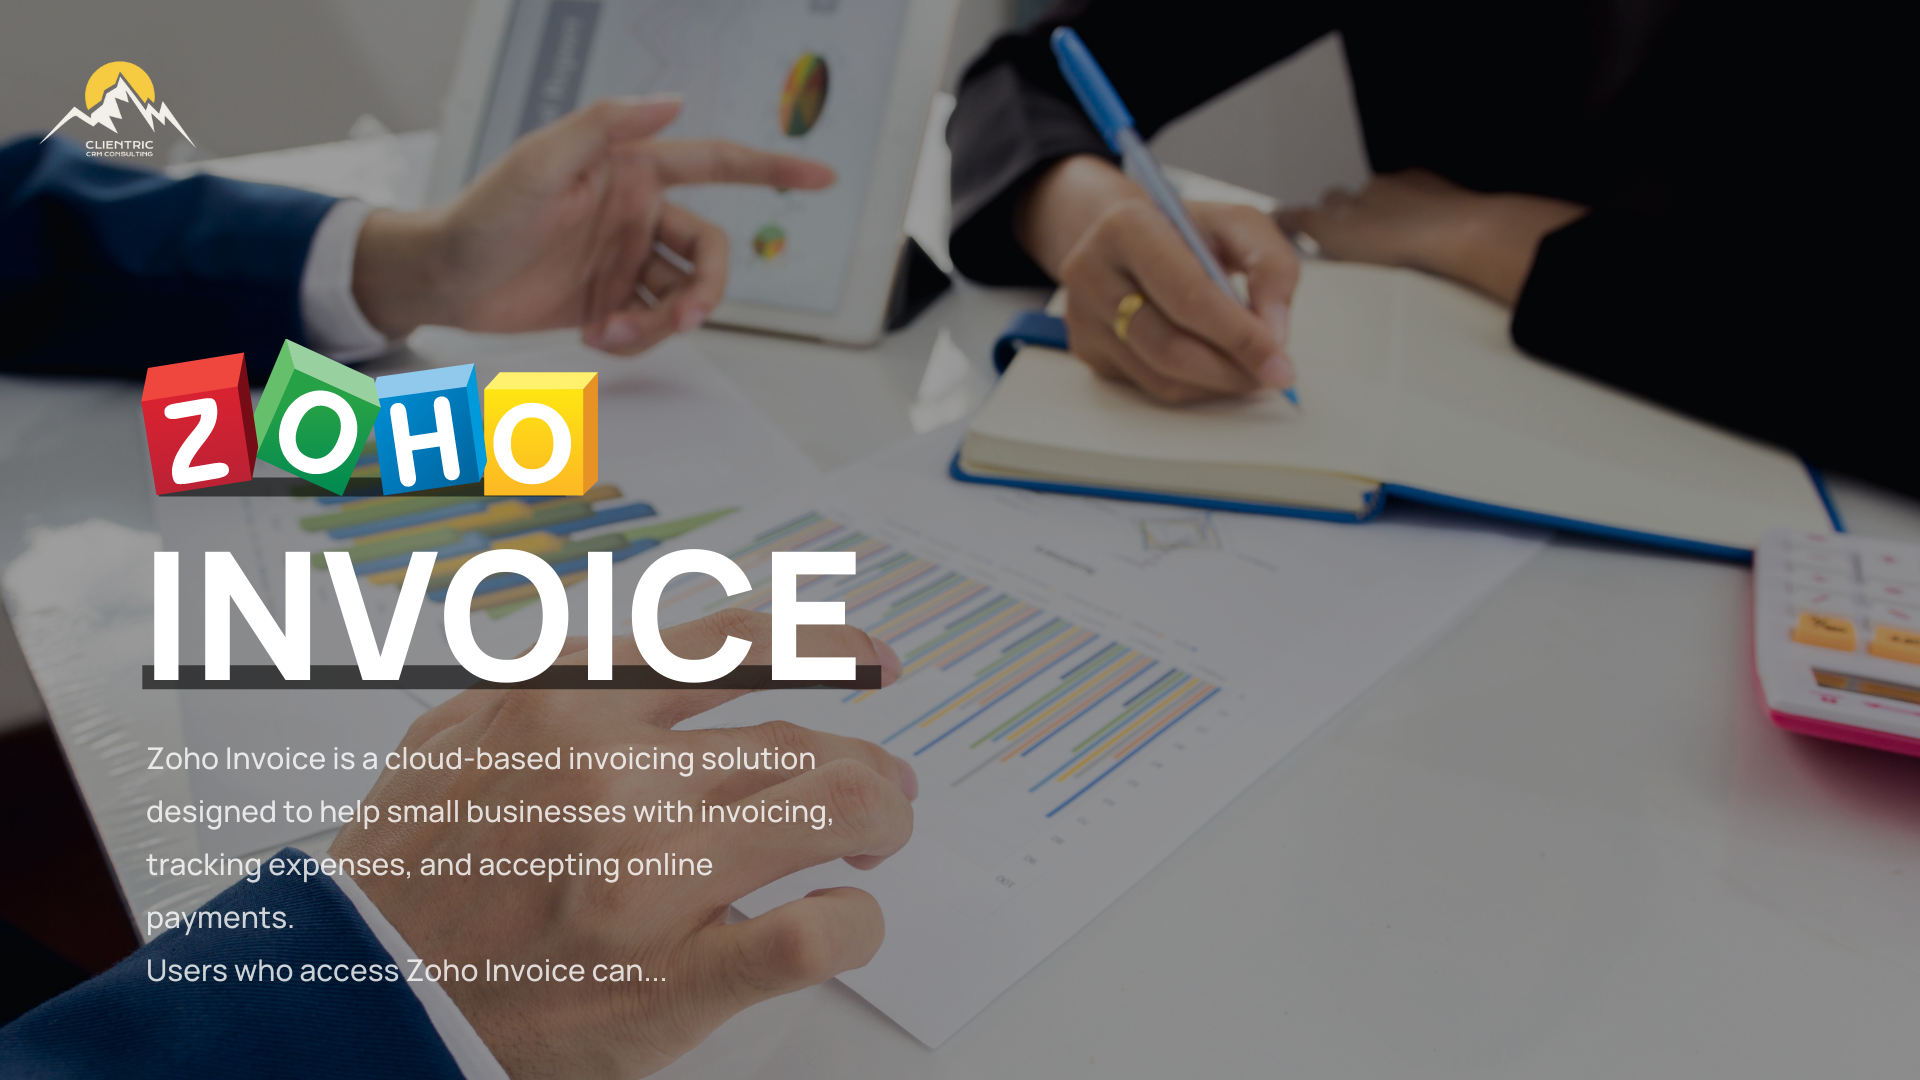 Zoho Invoice – A Cloud-based invoicing solution